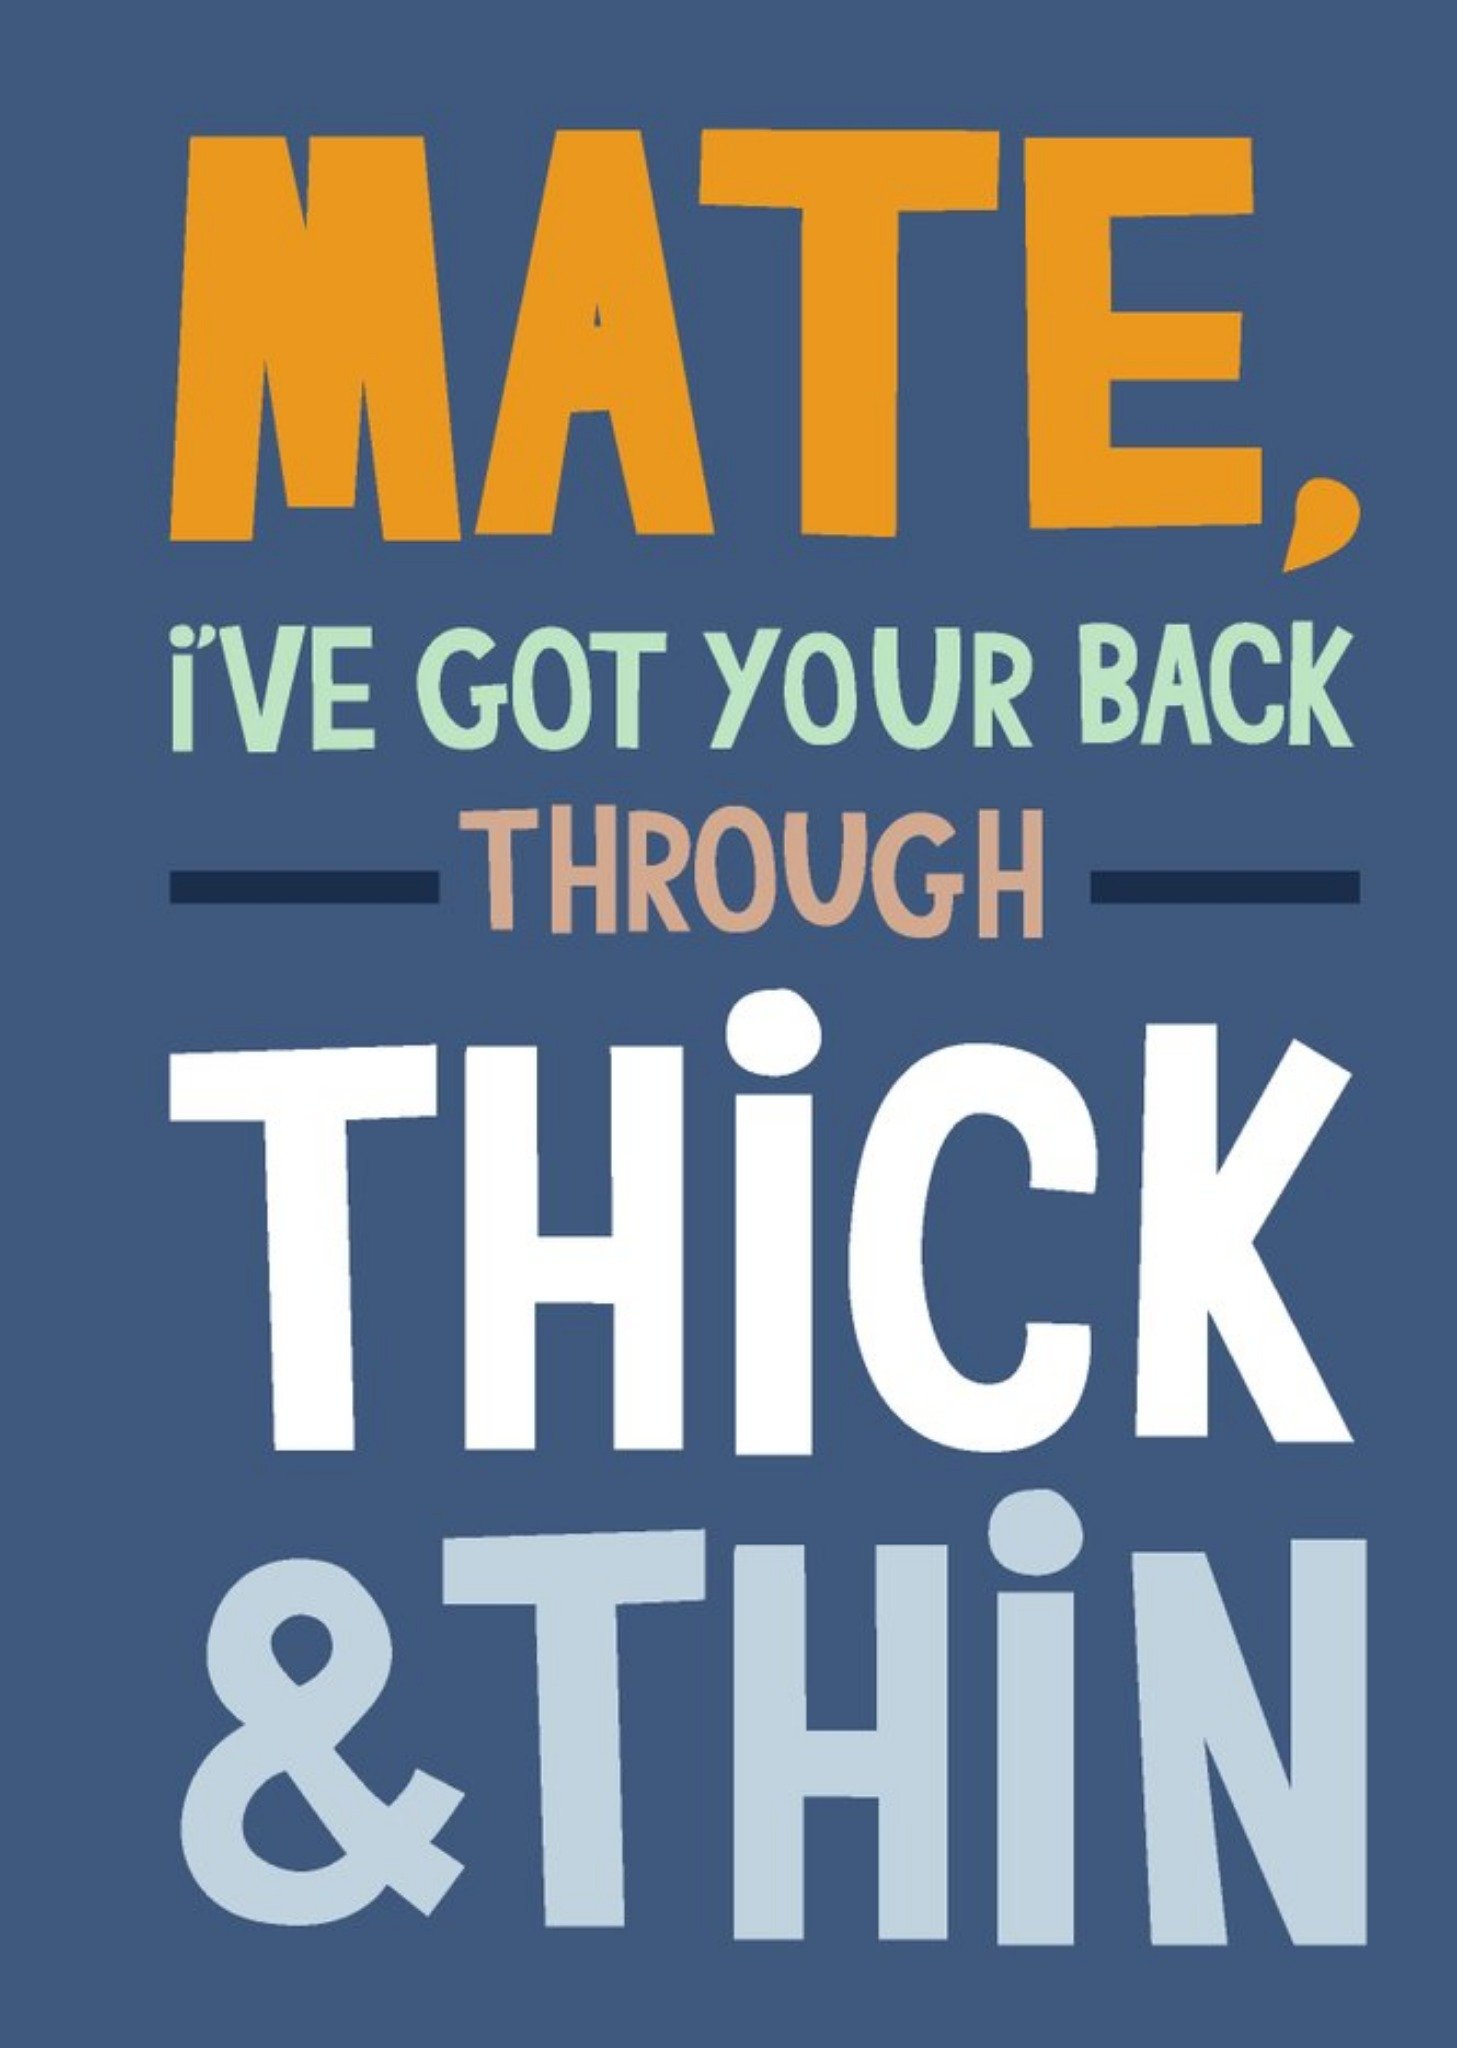 Moonpig Typographic Mate, I've Got Your Back Through Thick And Thin Card, Large